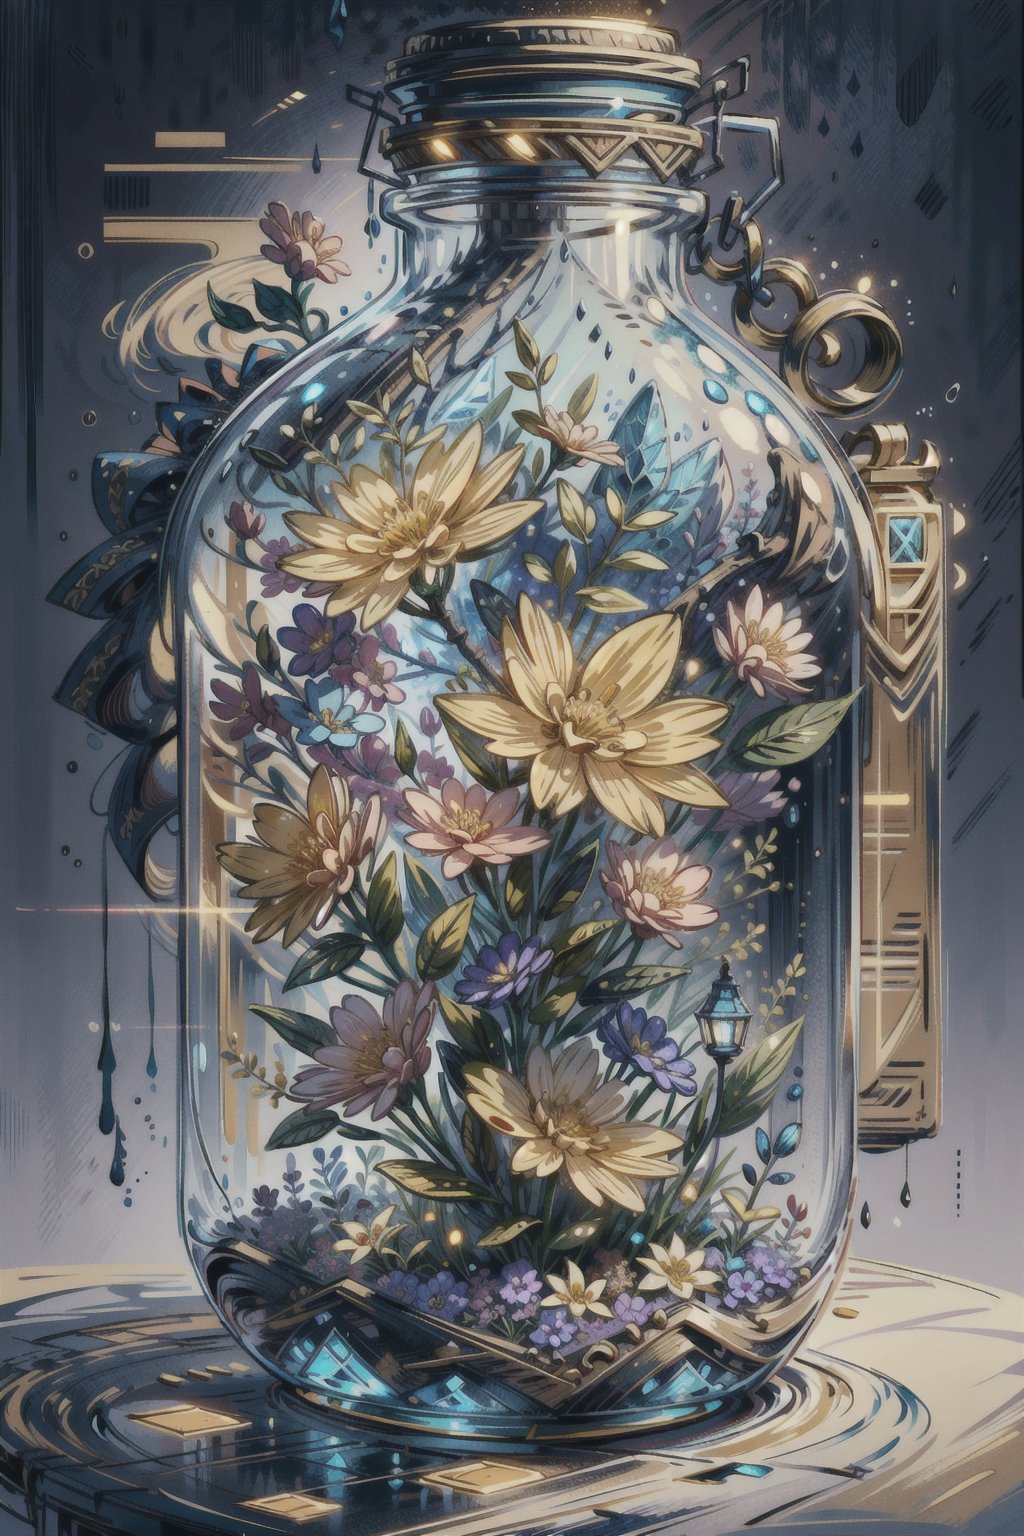 Highres, best quality, extremely detailed, area lighting in background, HD, 8k, extremely intricate:1.3), realistic, SMALL BODY, CUTE, GlowingRunes_yellow, stomach, elf, fairy, phgls, in container, Transparent colorless vaze, flowers, colorful background, flowers, warm colors, soft colors, impressionistic, abstract, 